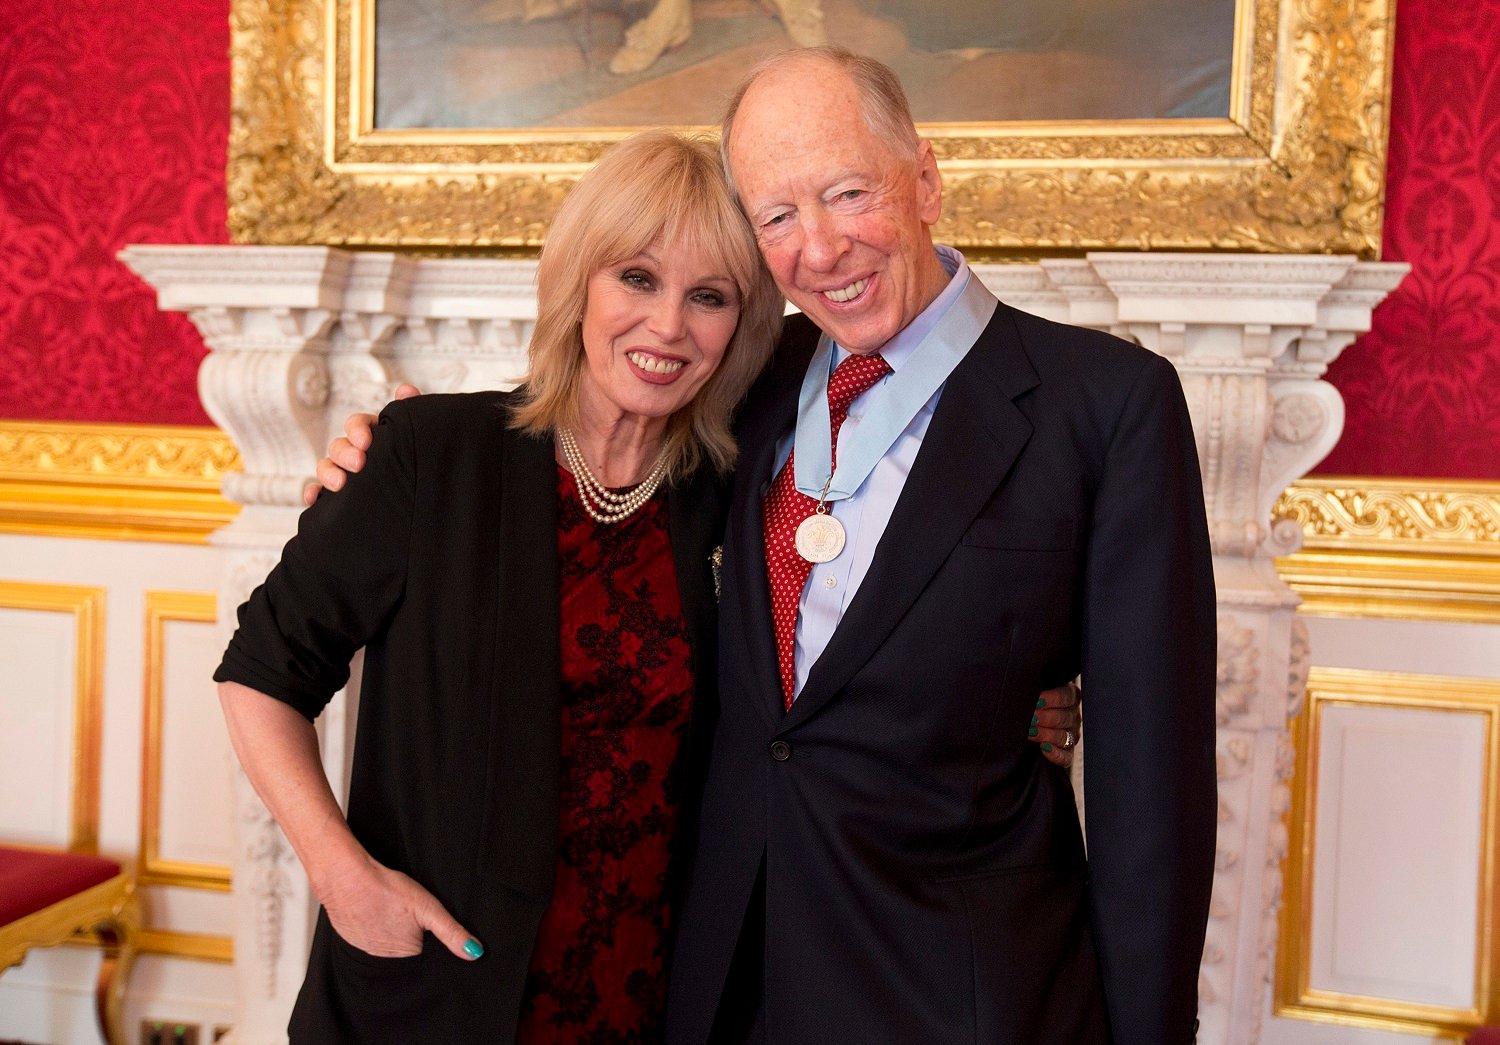 Rothschild Family Photo Rothschild Family Net Worth: How Much Is The Family Worth?